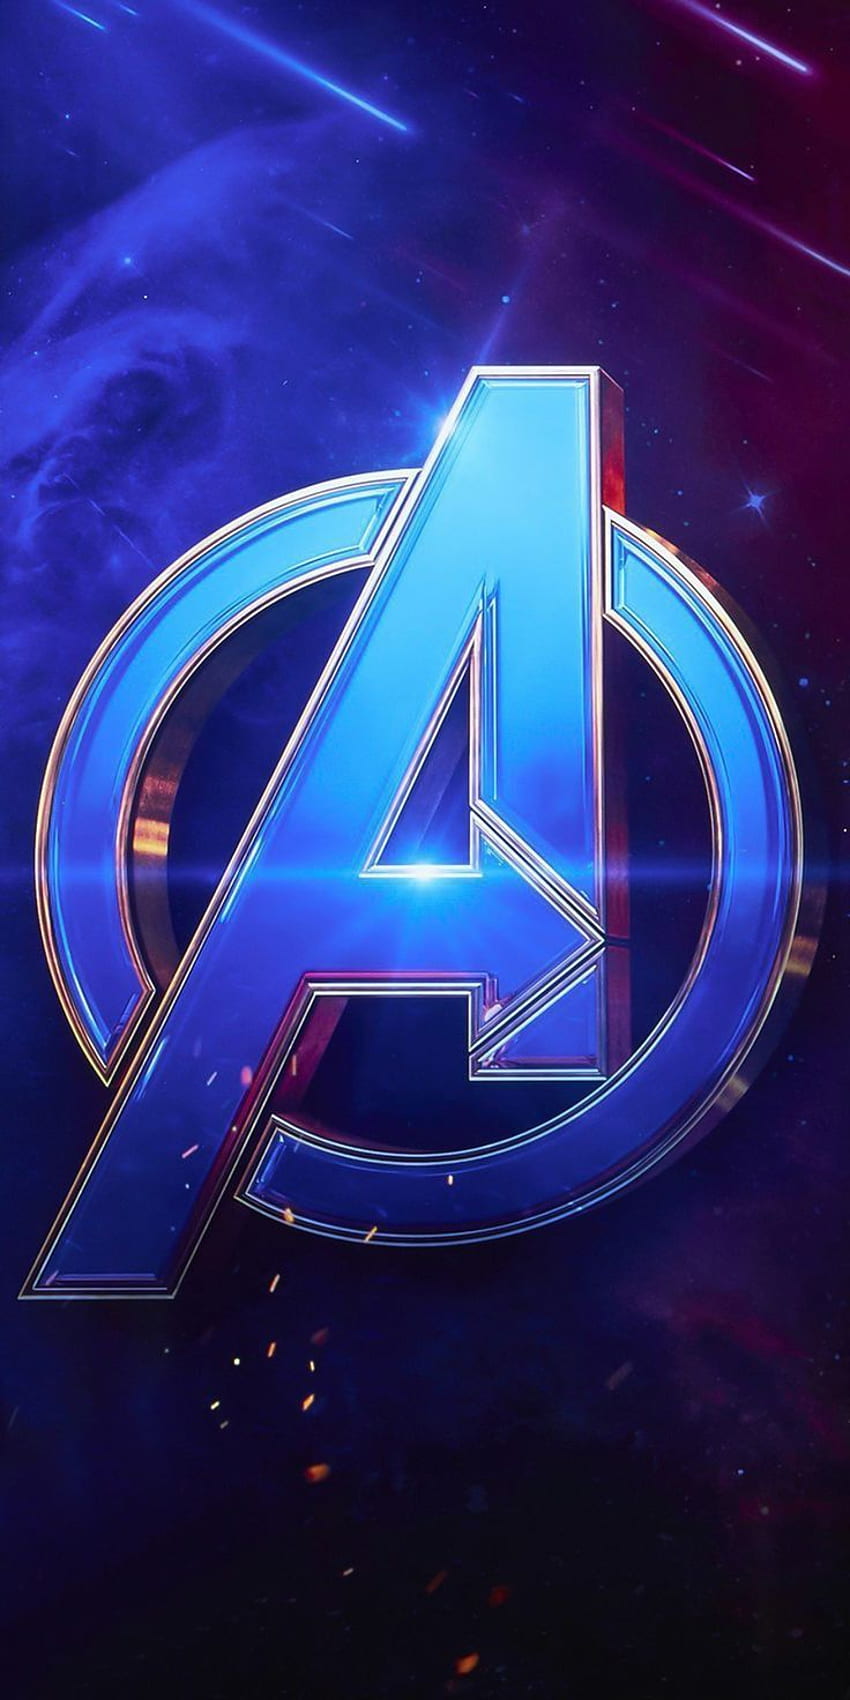 Pick an Avengers wallpaper from this selection of the best 82 images